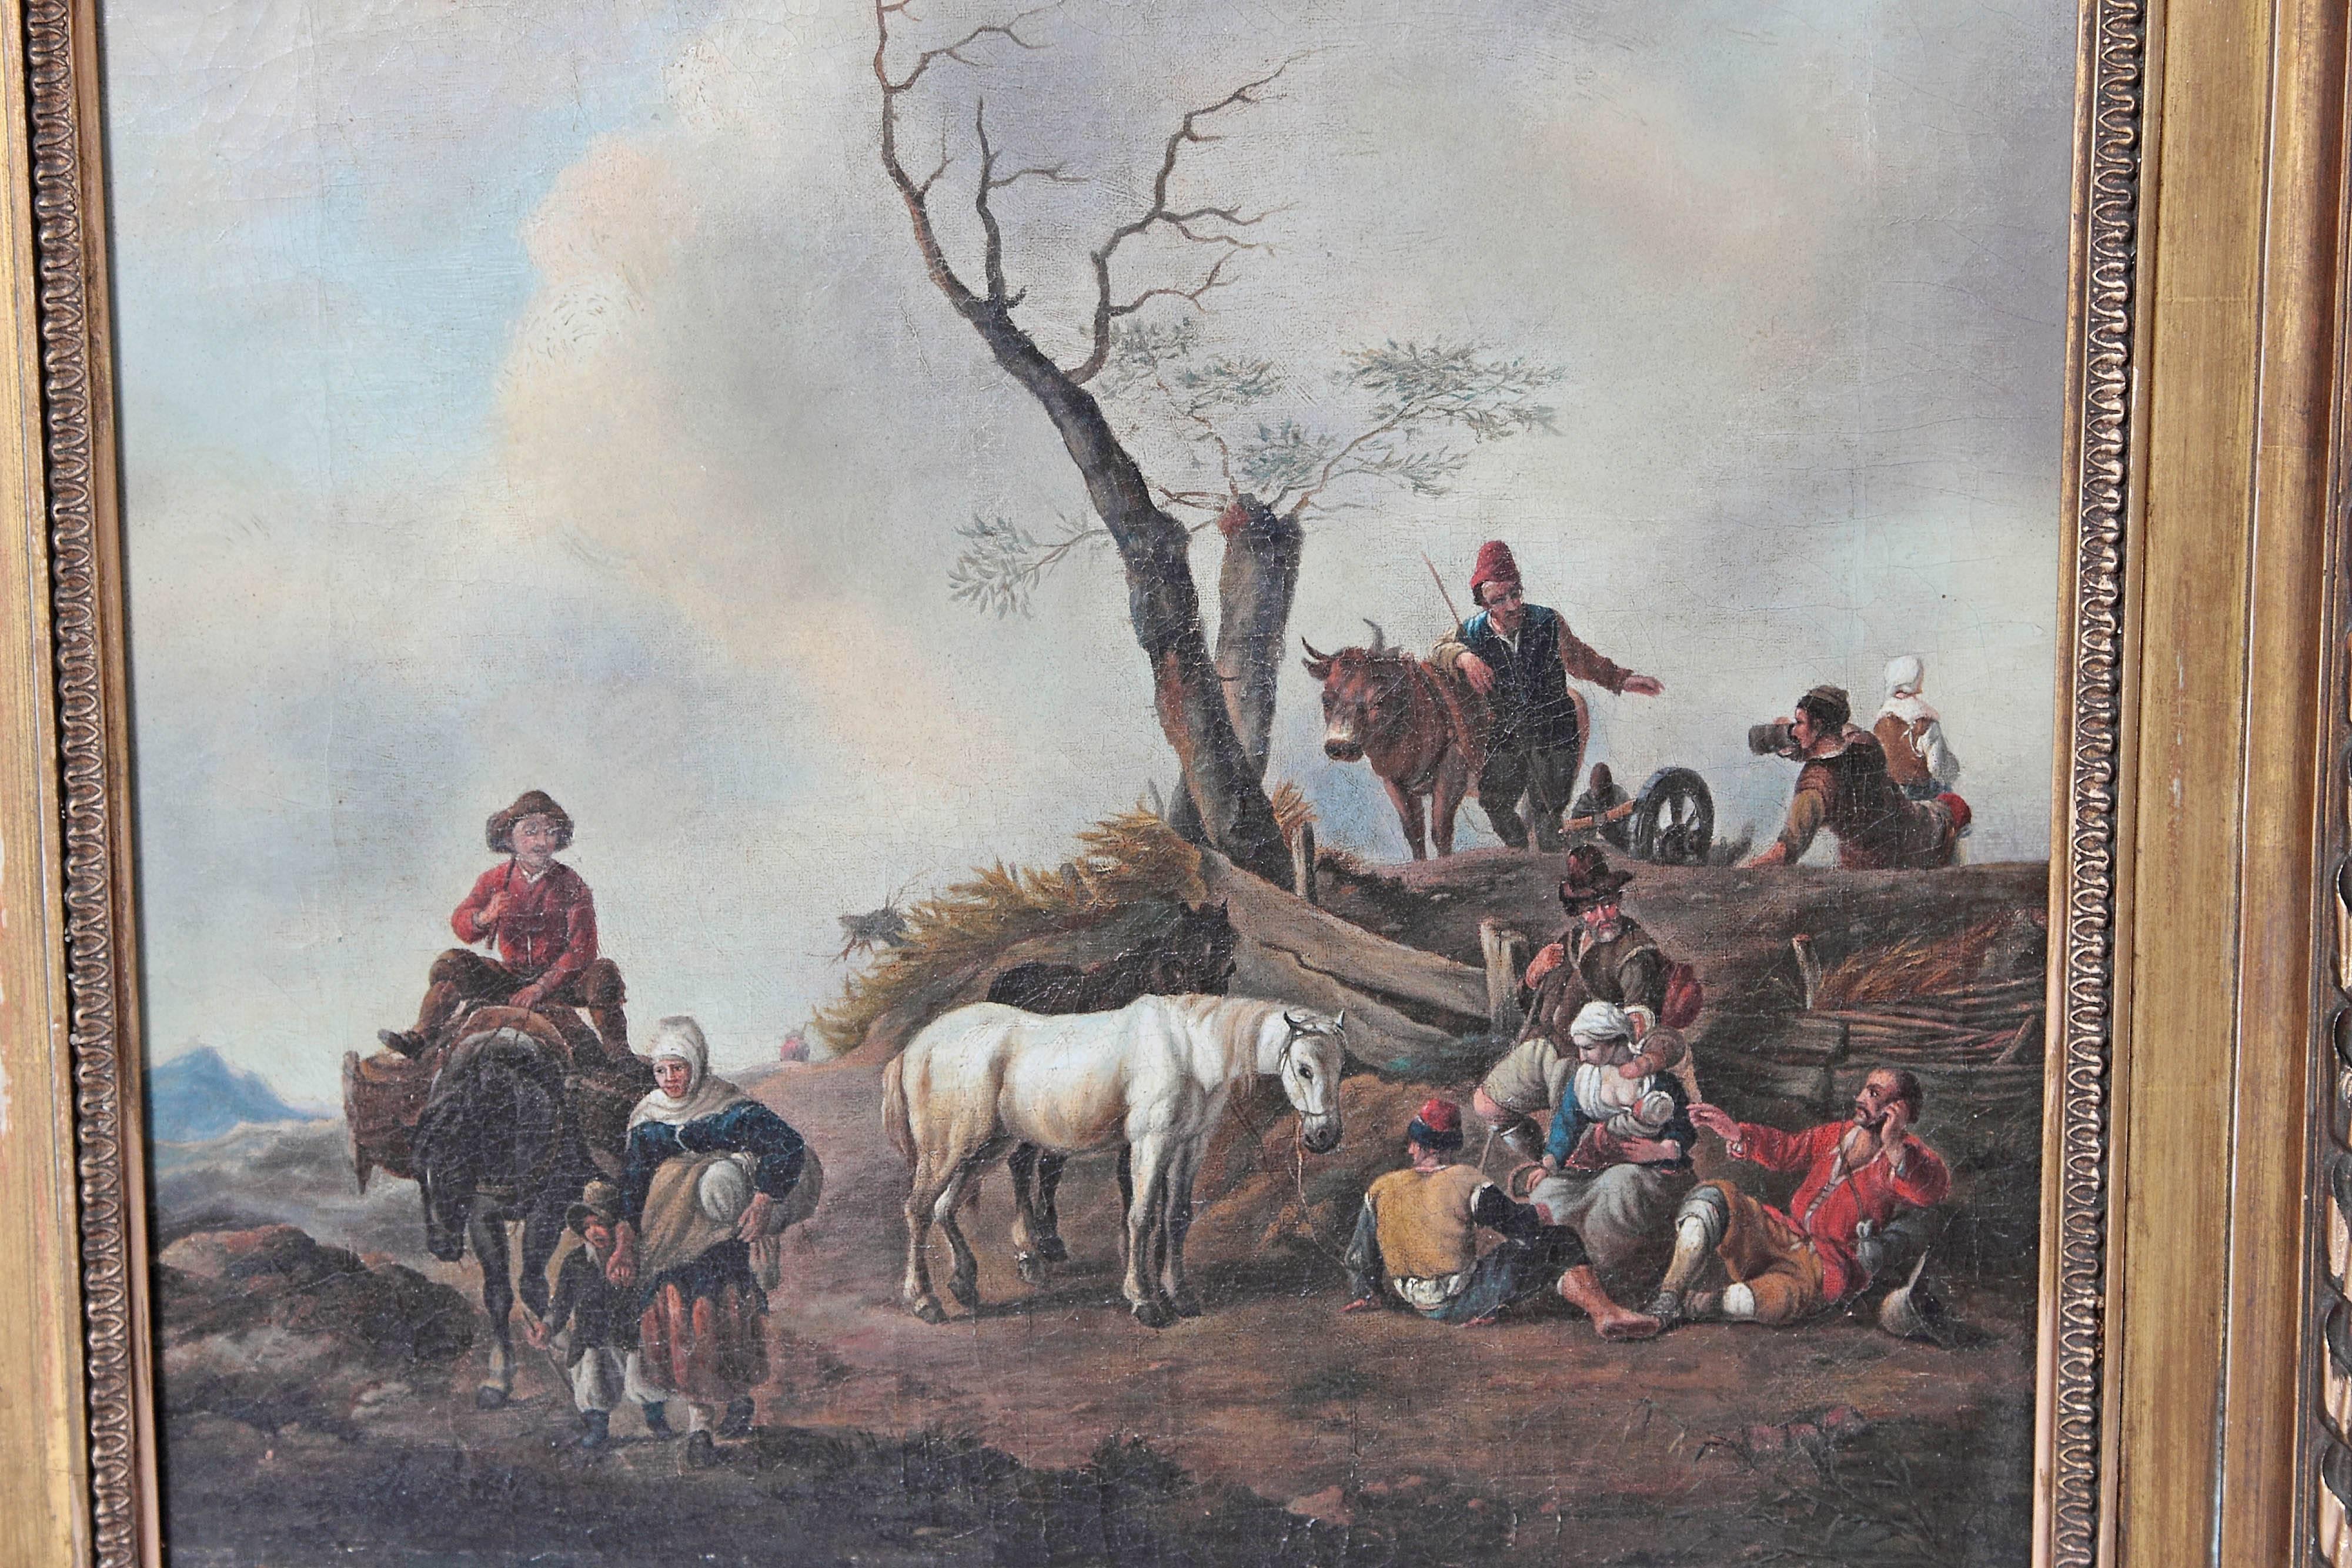 An oil on canvas scene of people and animals in a landscape with a dead tree. Realistically portrayed and well executed. In the style of Philips Wouwerman, 18th century 